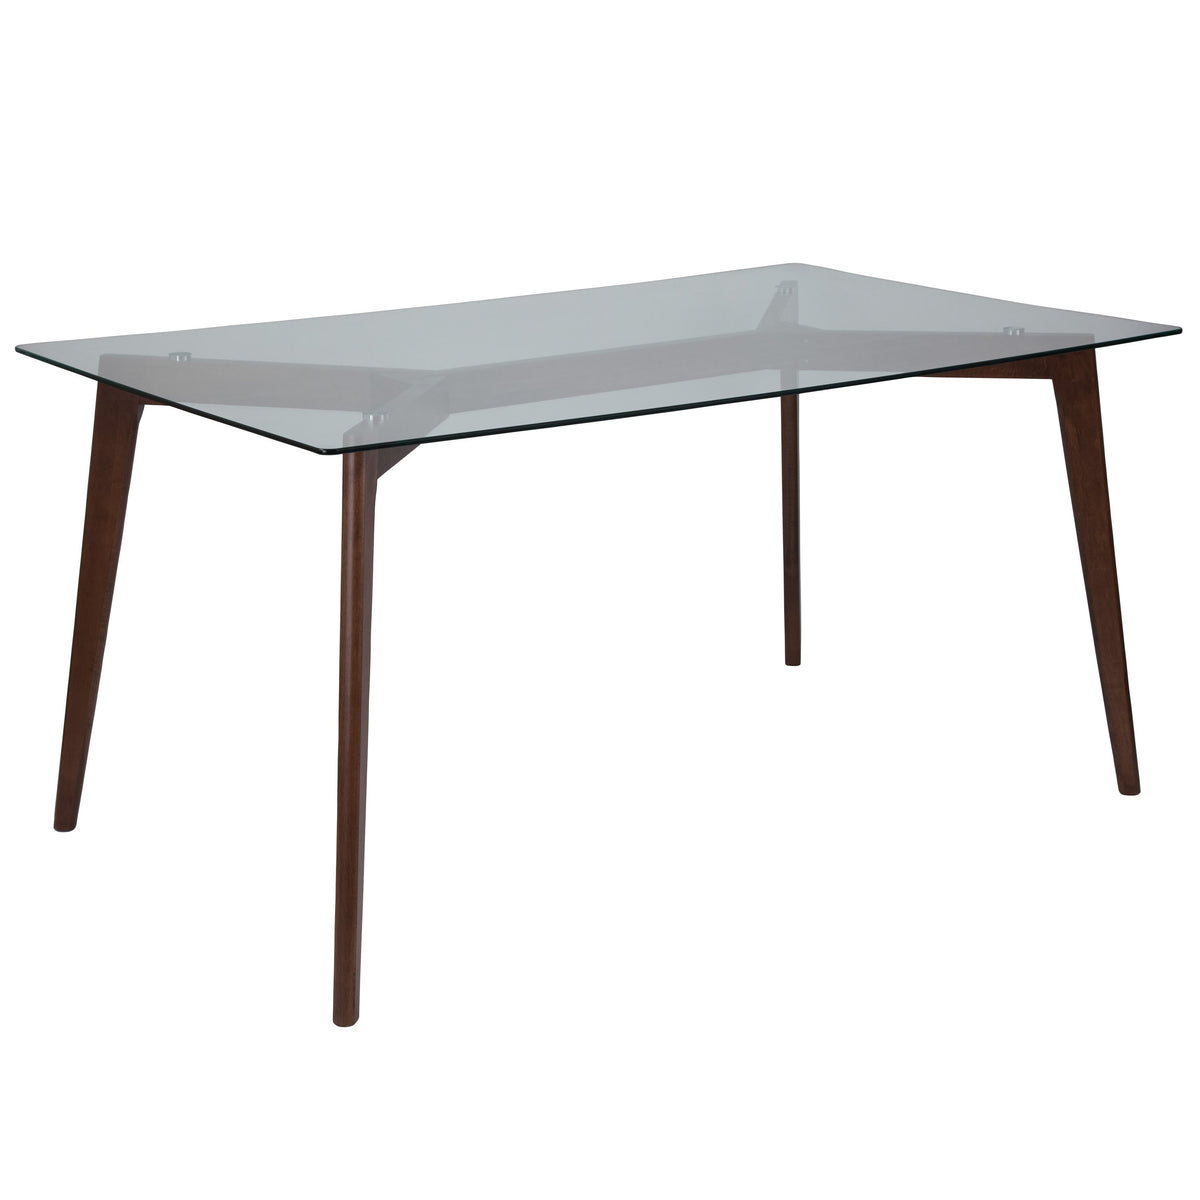 Clear Top/Walnut Frame |#| 35.25inch x 59inch Rectangular Solid Walnut Wood Table with Clear Glass Top